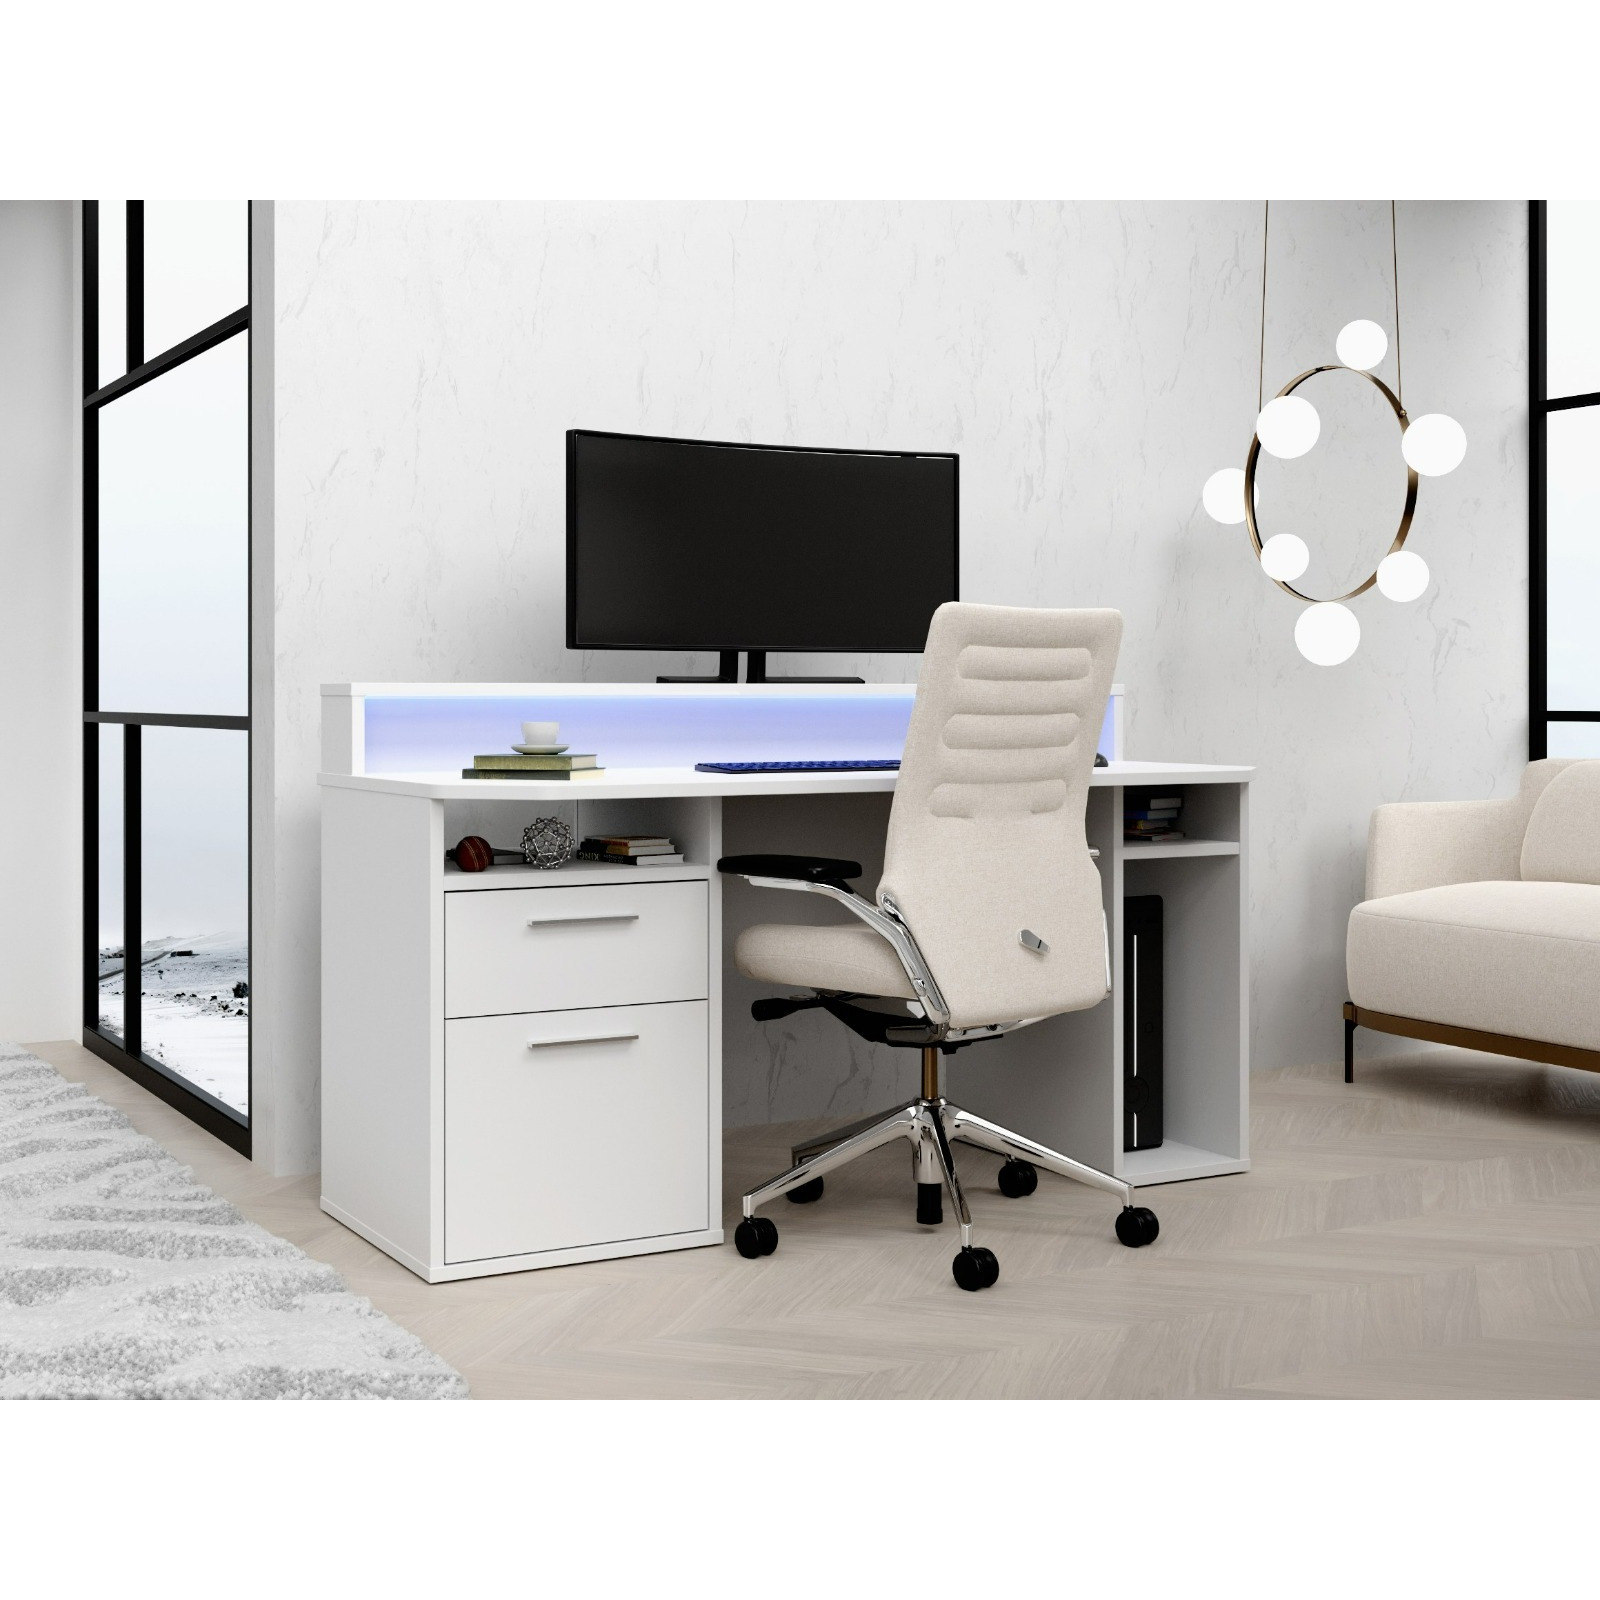 Flair Power Z White Computer Gaming Desk With Colour Changing LED Lights - image 1